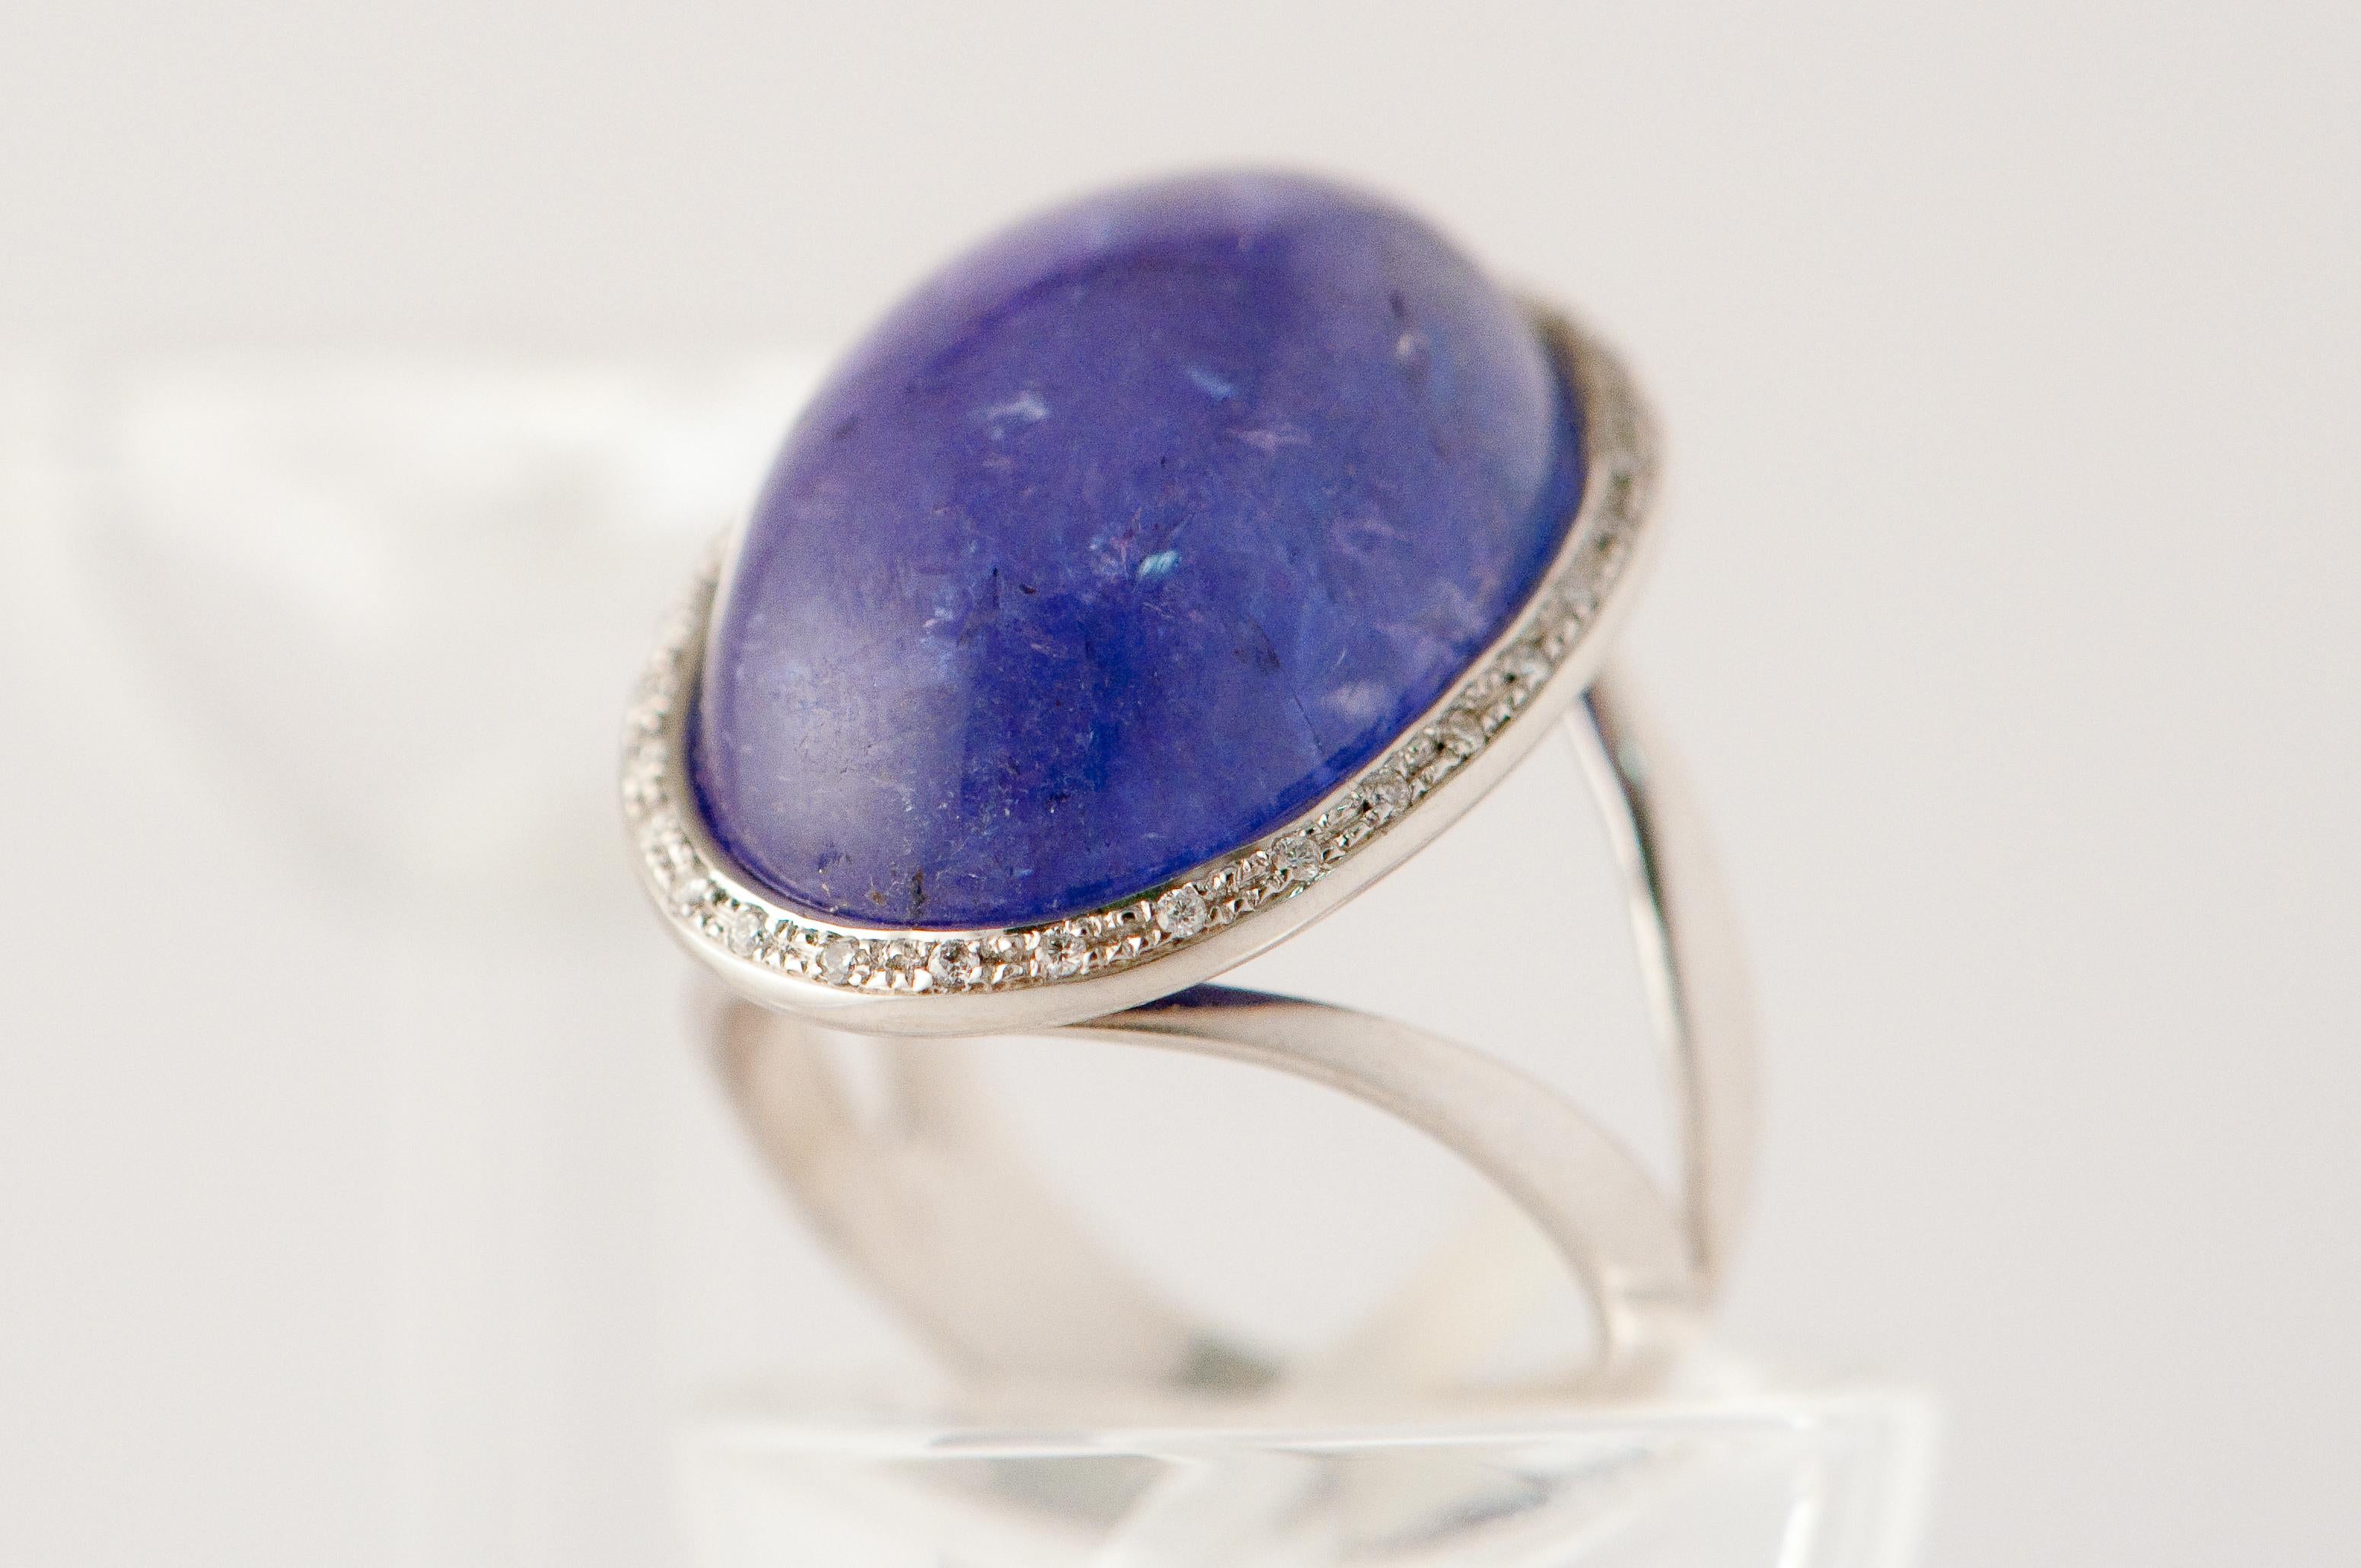 Women's White Gold Ring with Tanzanite, Ornamented with Diamonds